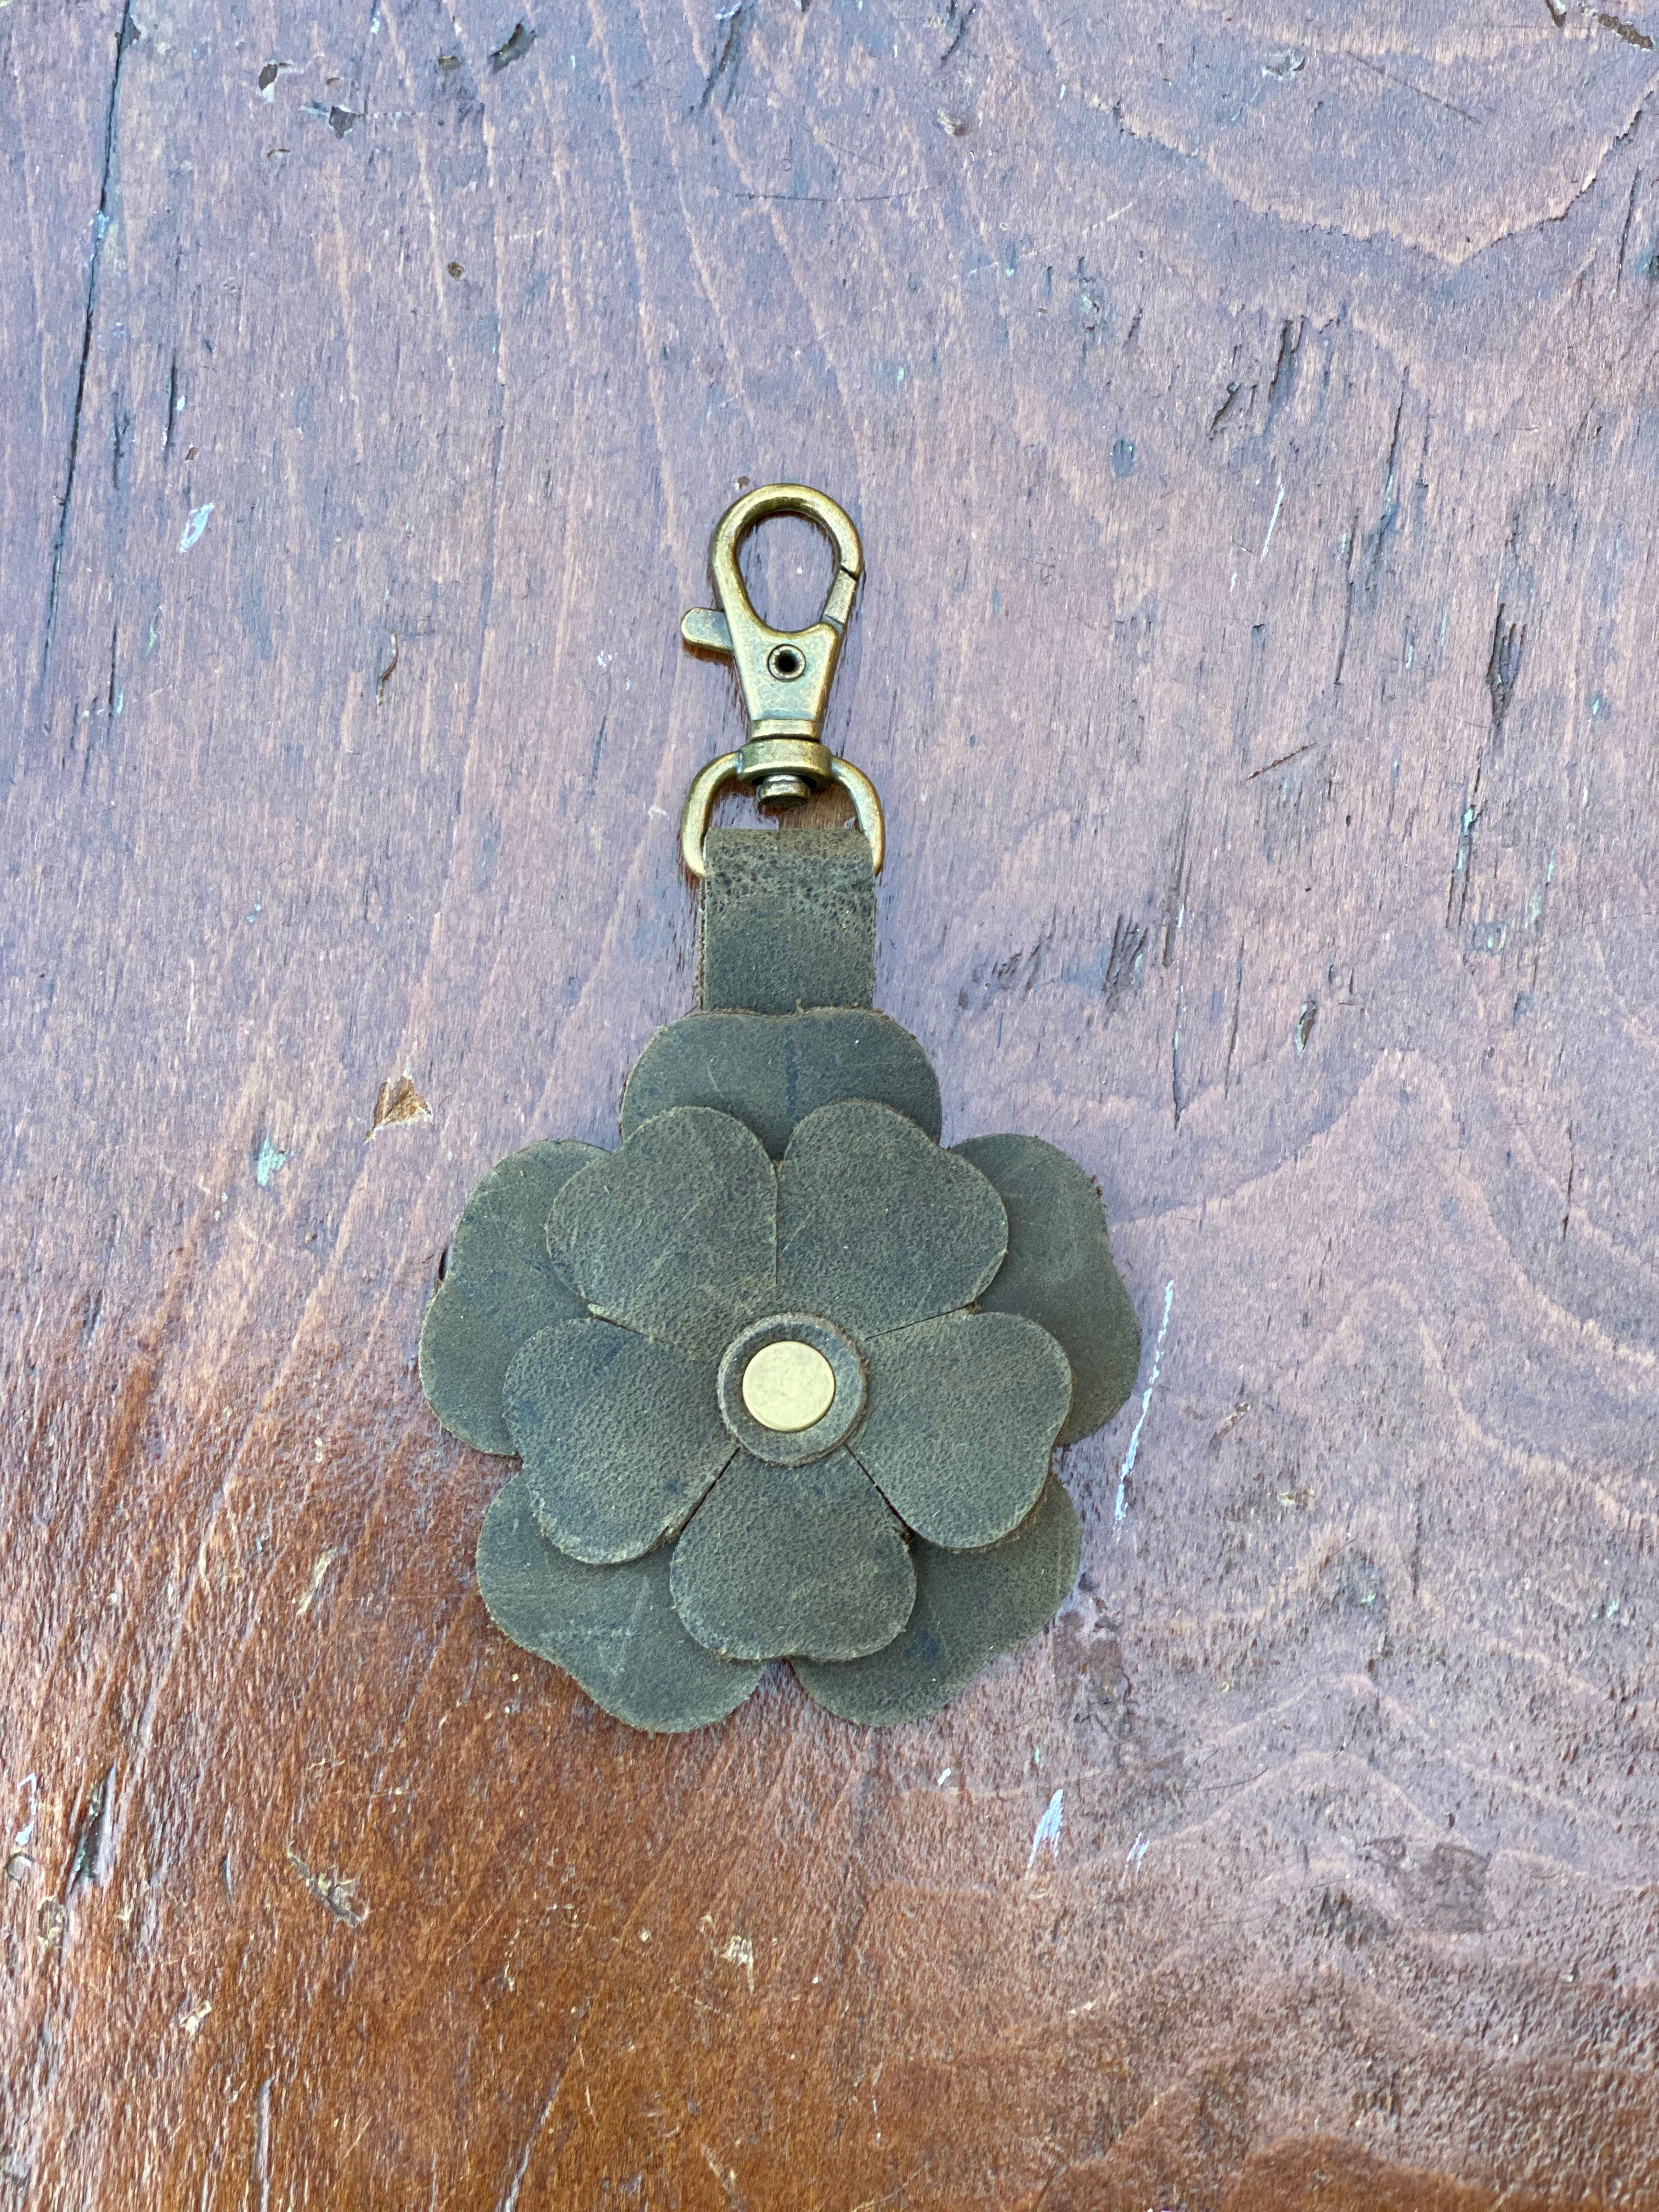 Clip on Leather Flower Bag Purse Charm with Swivel Lobster Clasp